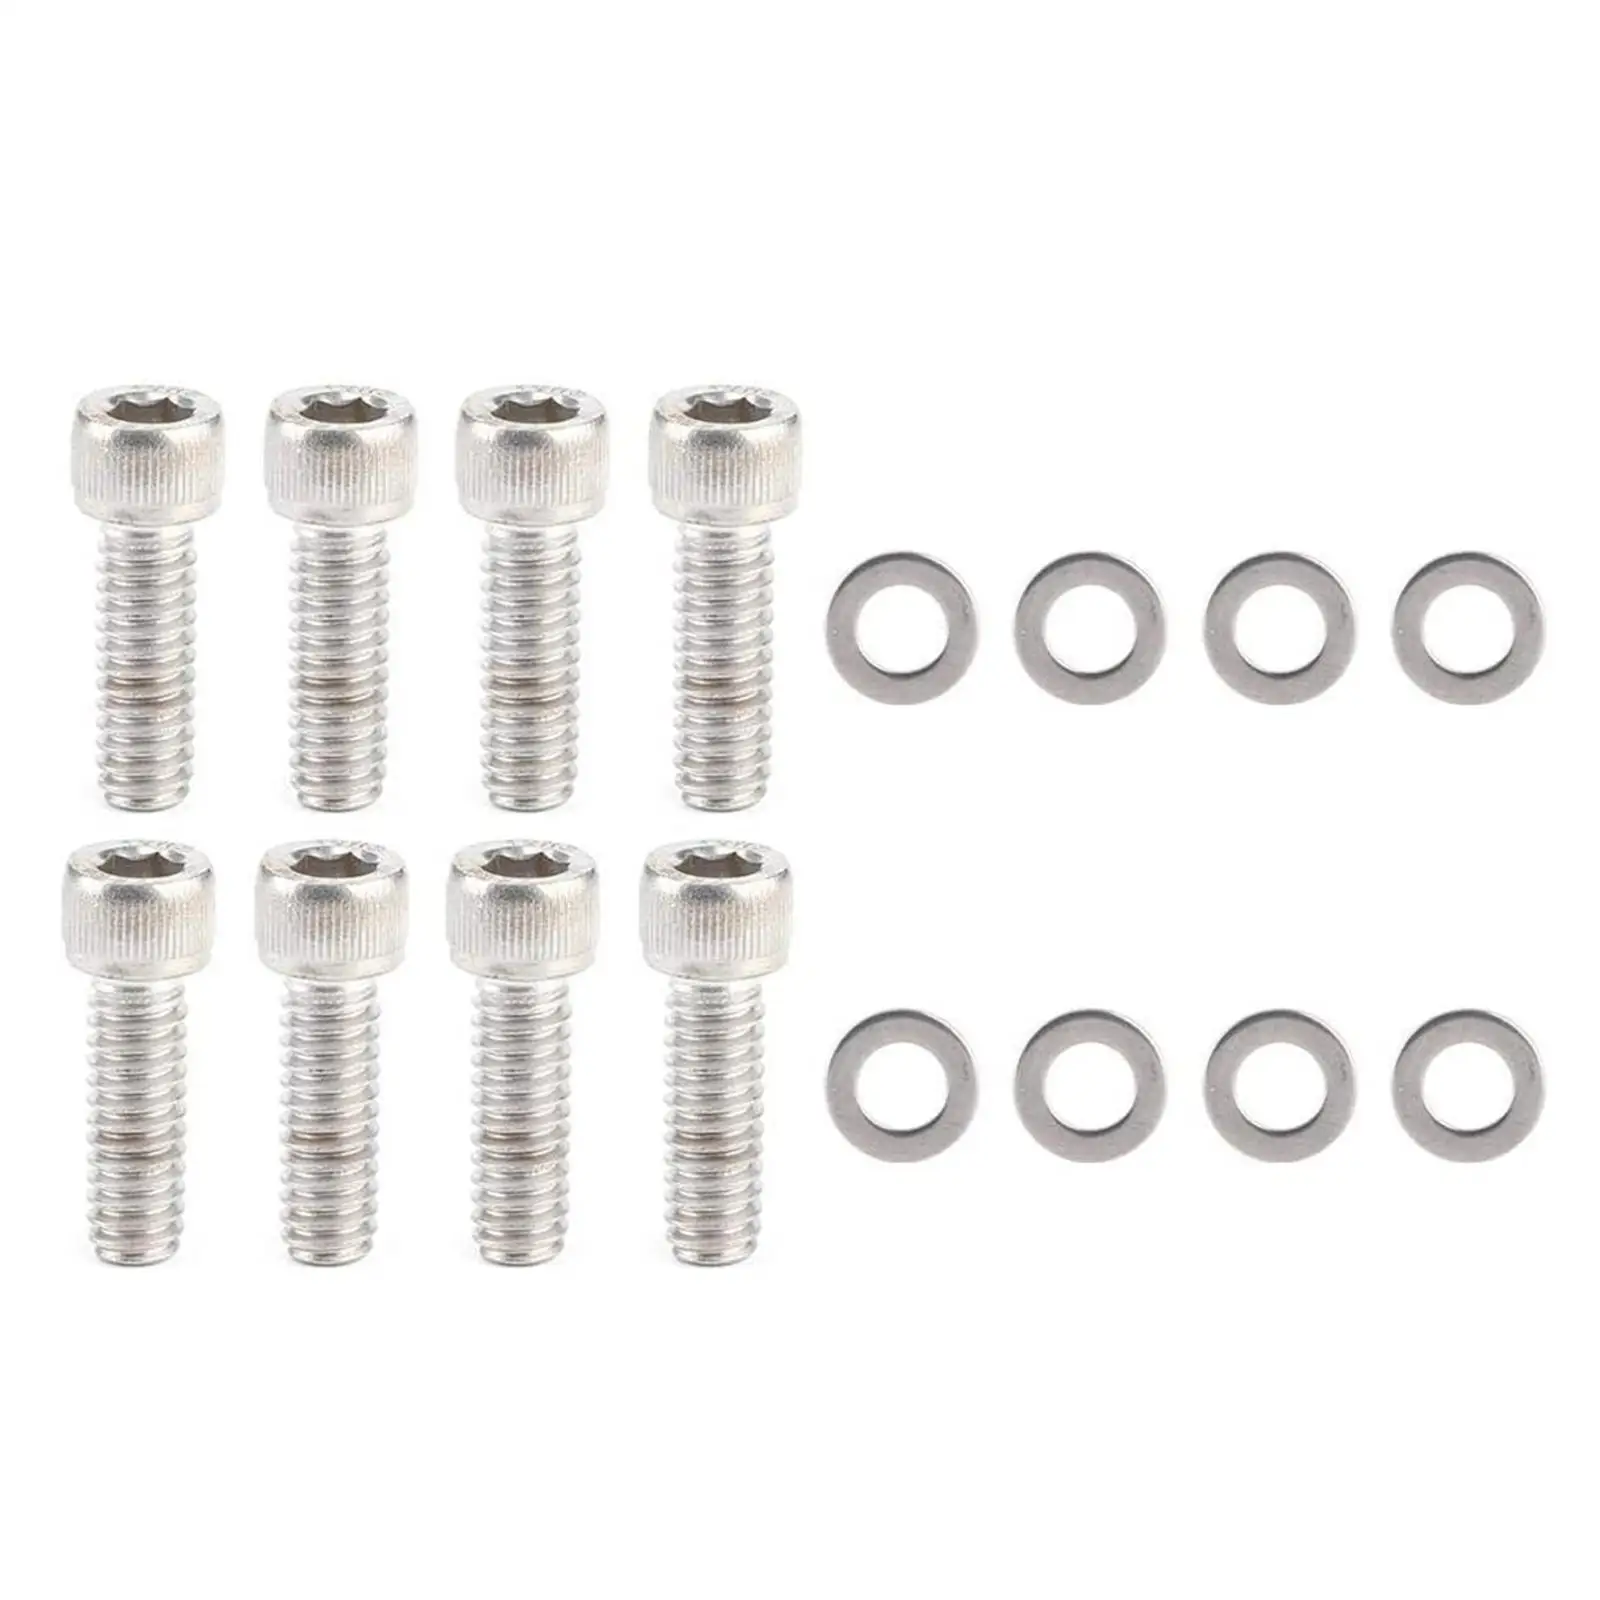 Sbc Valve Cover Bolts Replace Bolt Set Accessories Small Block Sponsored Engine Parts for Chevrolet 283 327 350 383 400